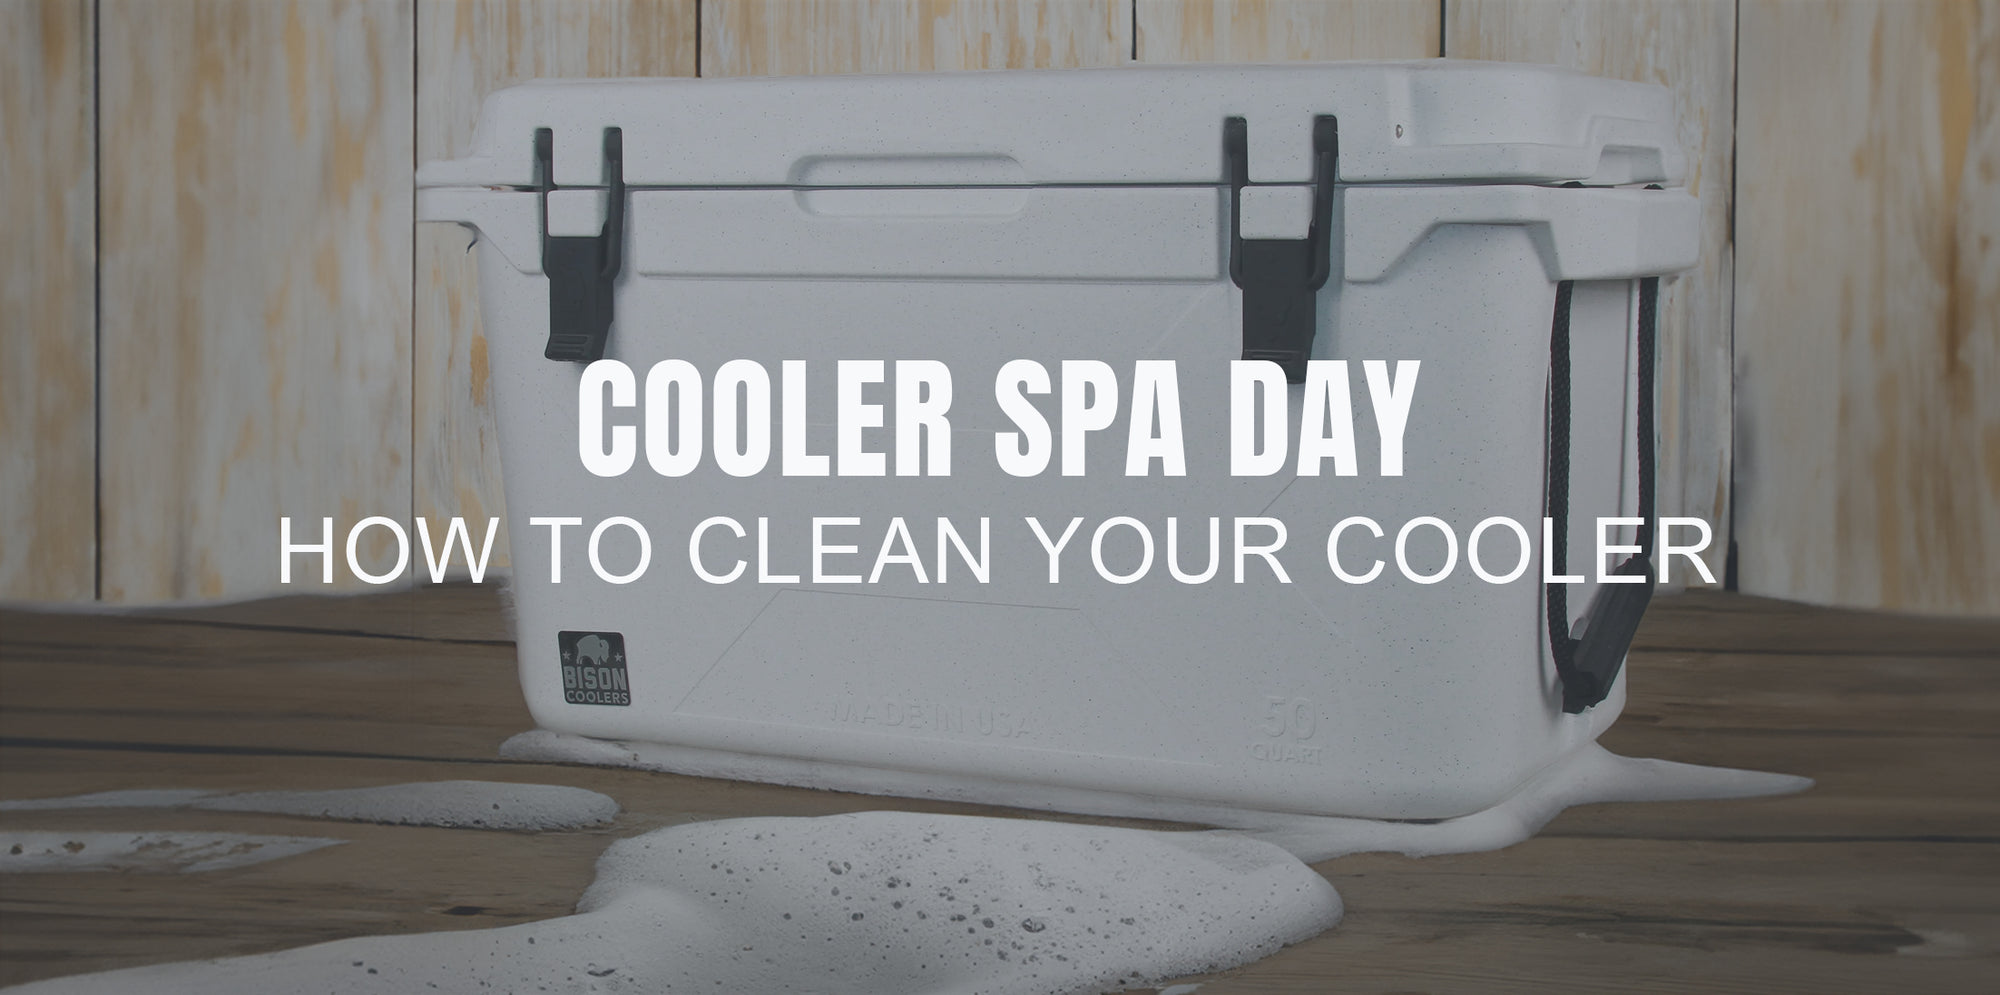 How to Give Your Cooler a Spa Day